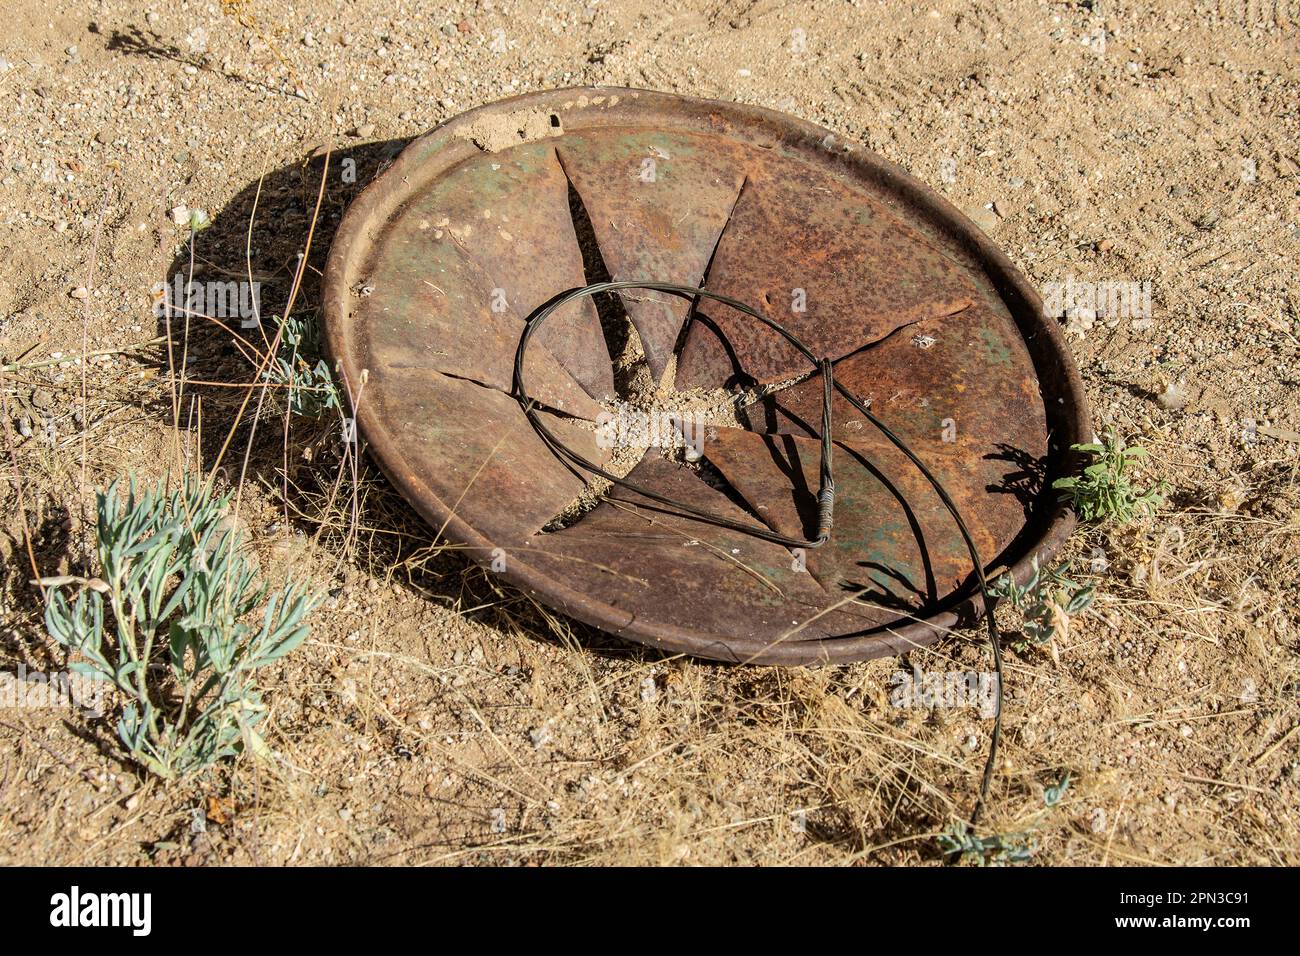 A star plate trap and wire that had been used for poaching. Stock Photo